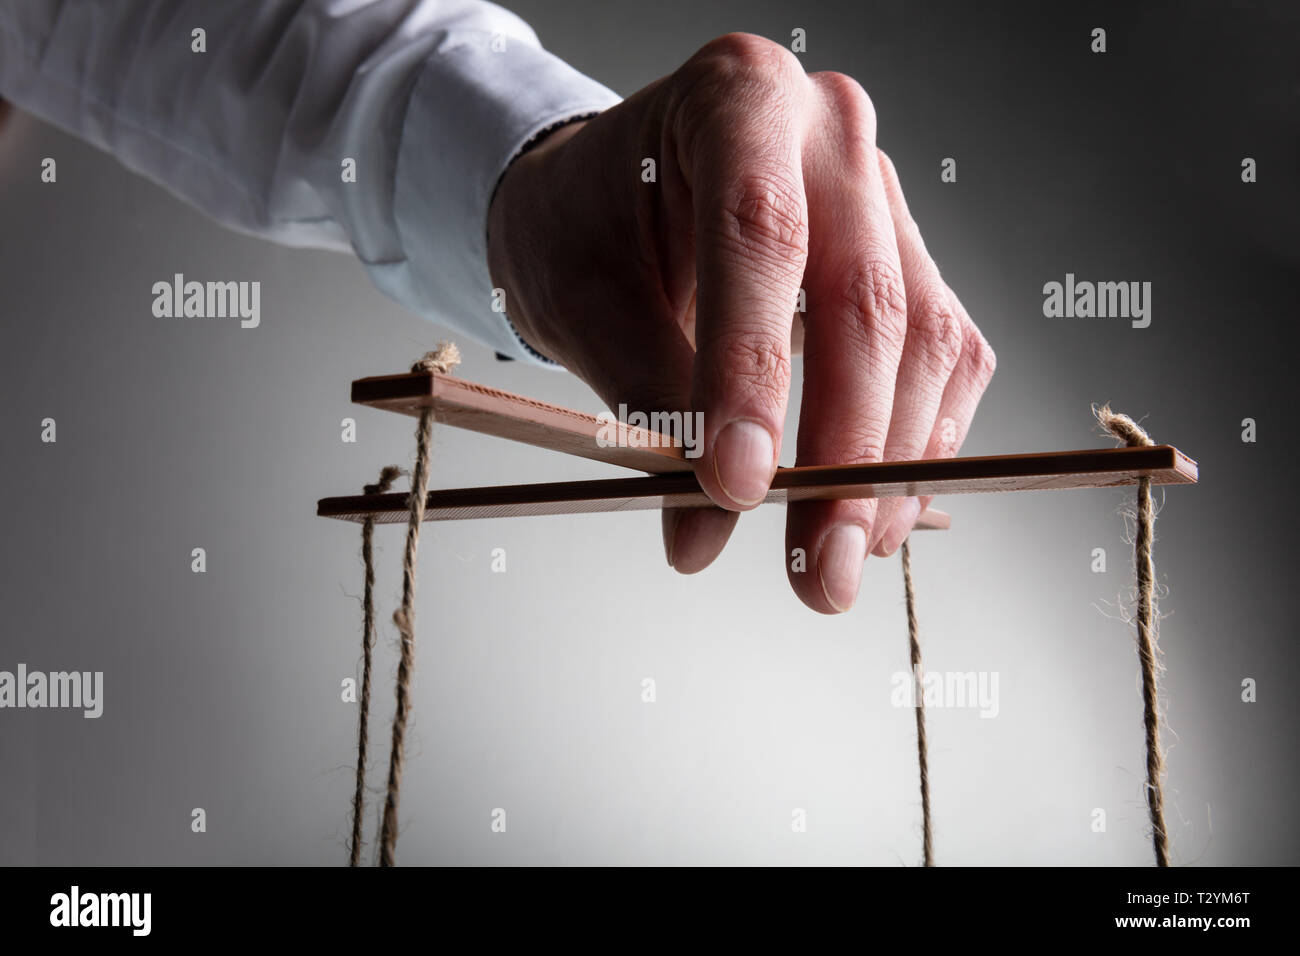 The Human Hand with Marionette on the Strings. Stock Image - Image